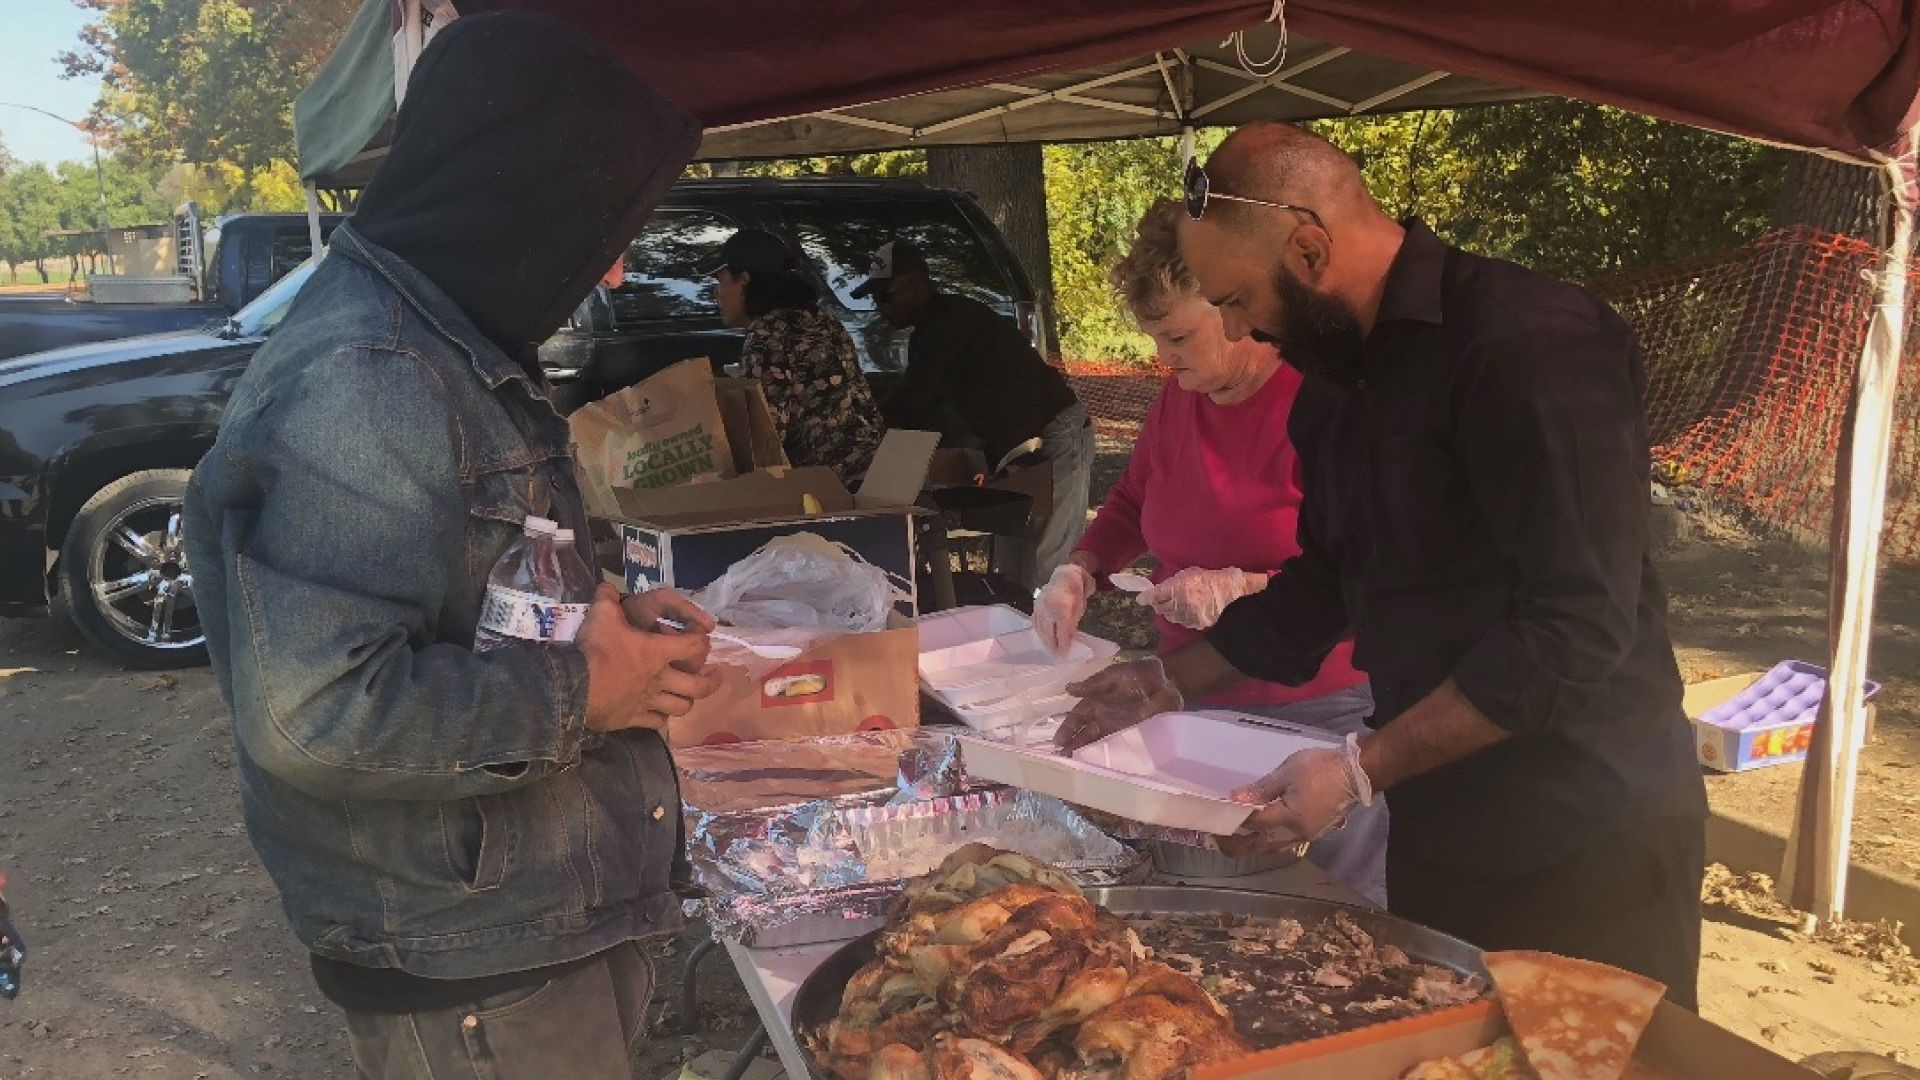 Narjis Alghazzi and her father Sam team up to help the homeless in their Modesto community by cooking warm meals, passing out canned food, toiletries and other necessities. Sam Alghazzi has been giving back in his own way for more than 10 years.